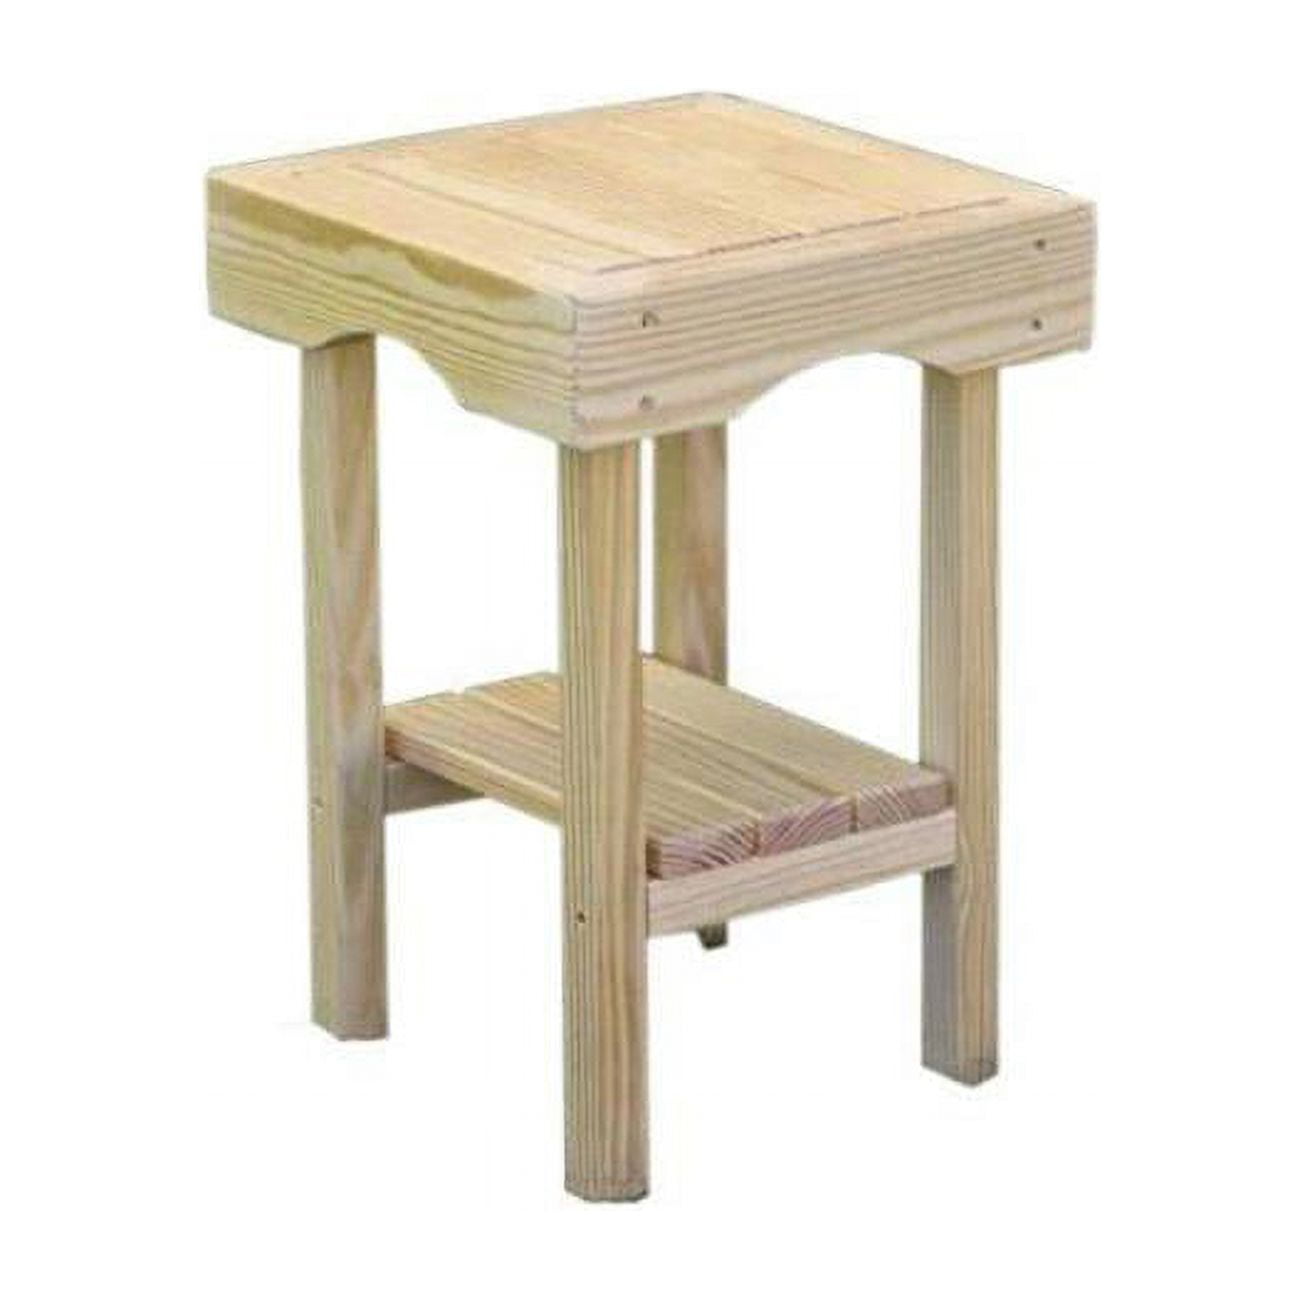 Fct1414cvd 14 X 14 In. Treated Pine Square End Table